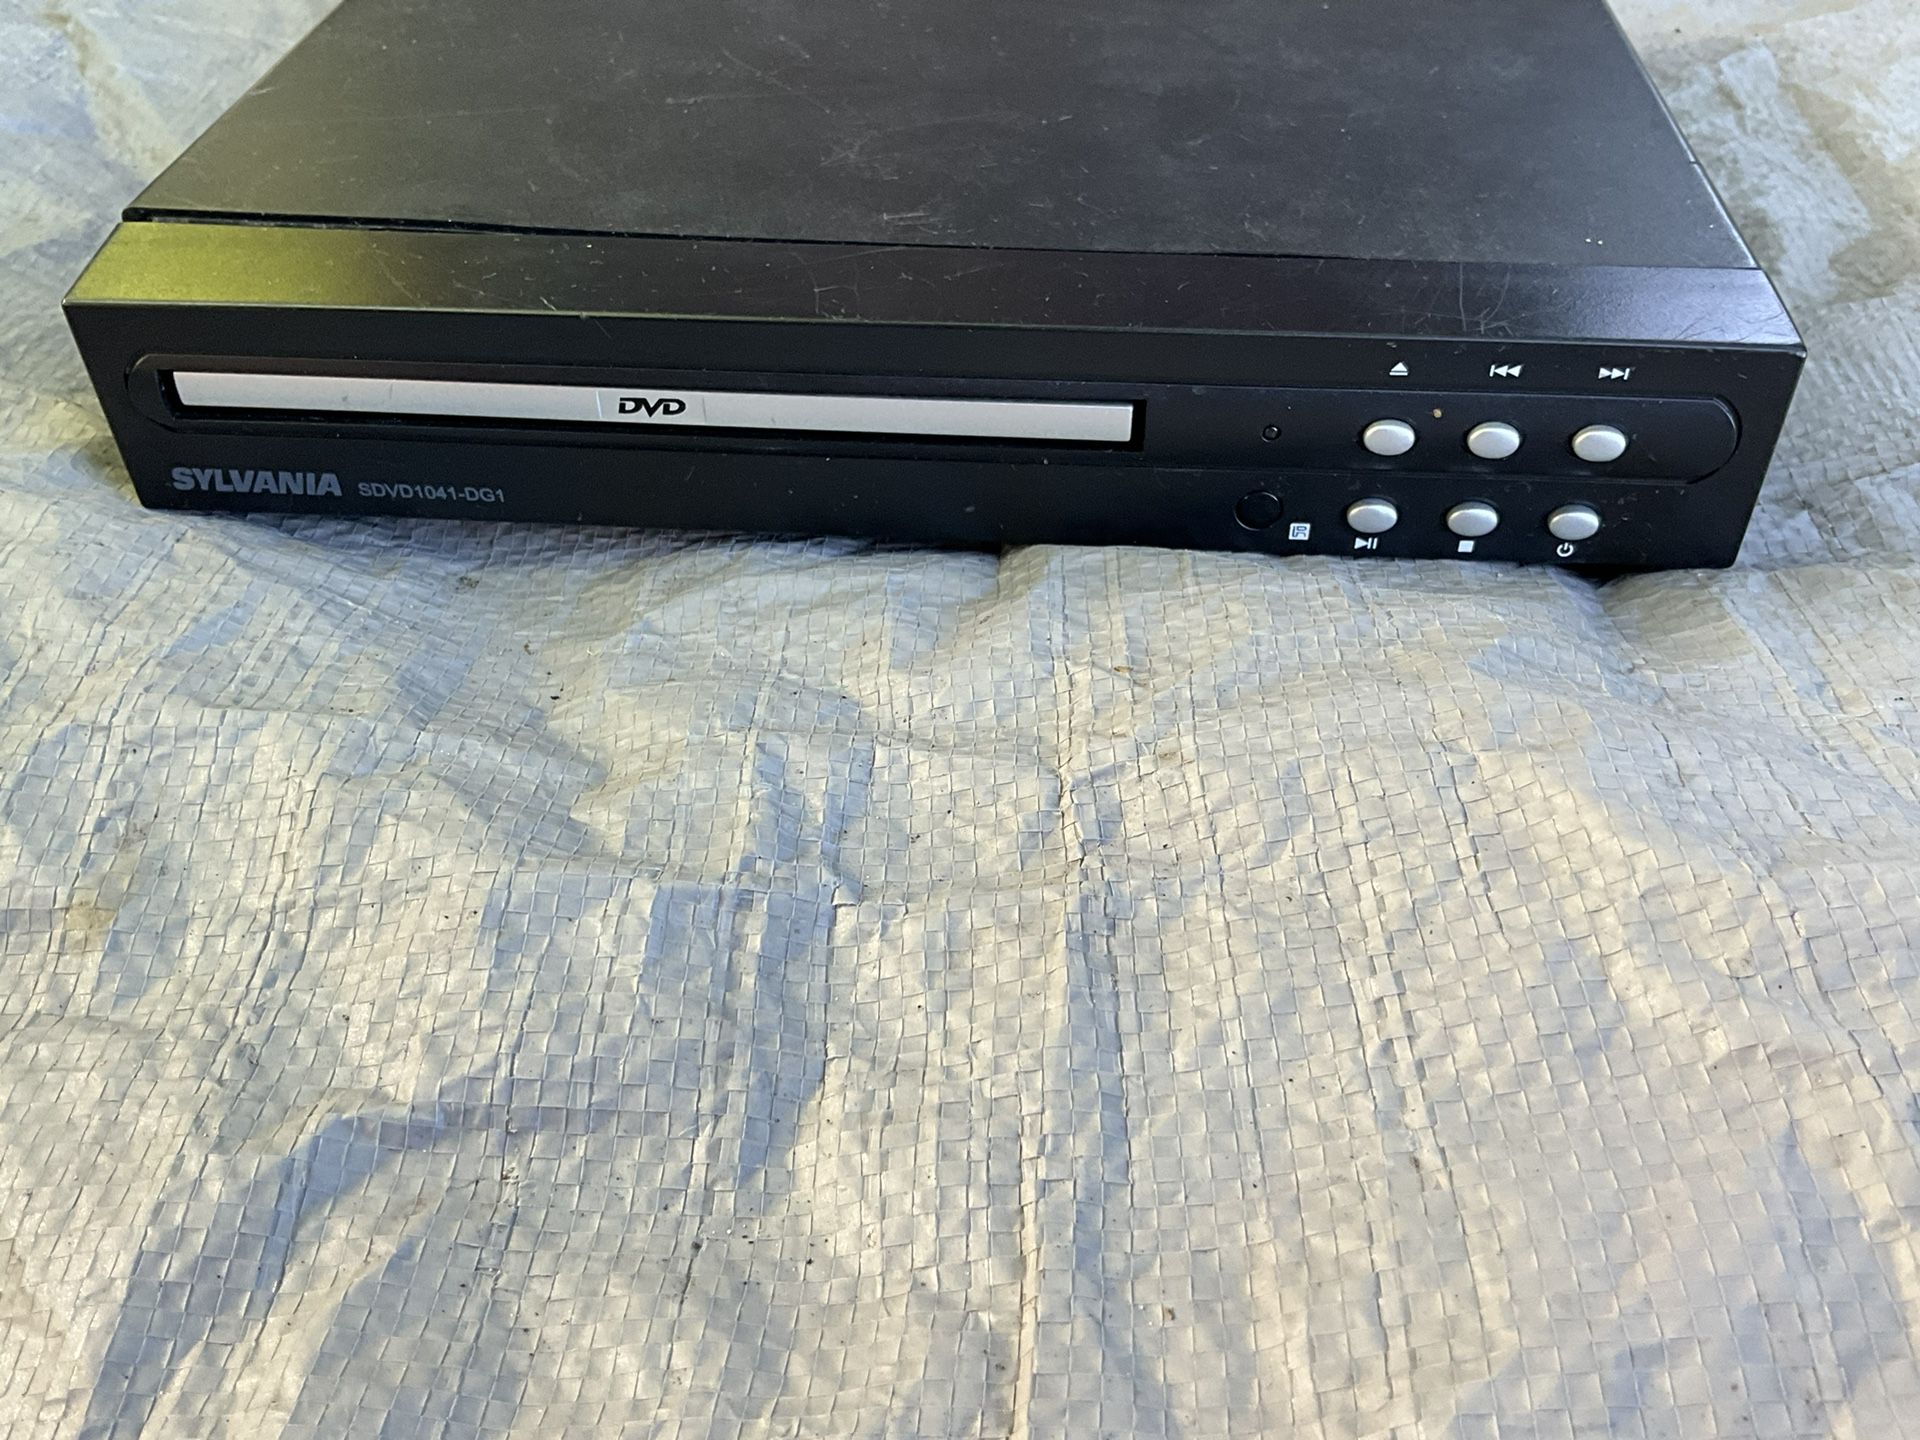 SYLVANIA Compact DVD Player SDVD1041-DG1 Black *Tested/Working* No Remote Used